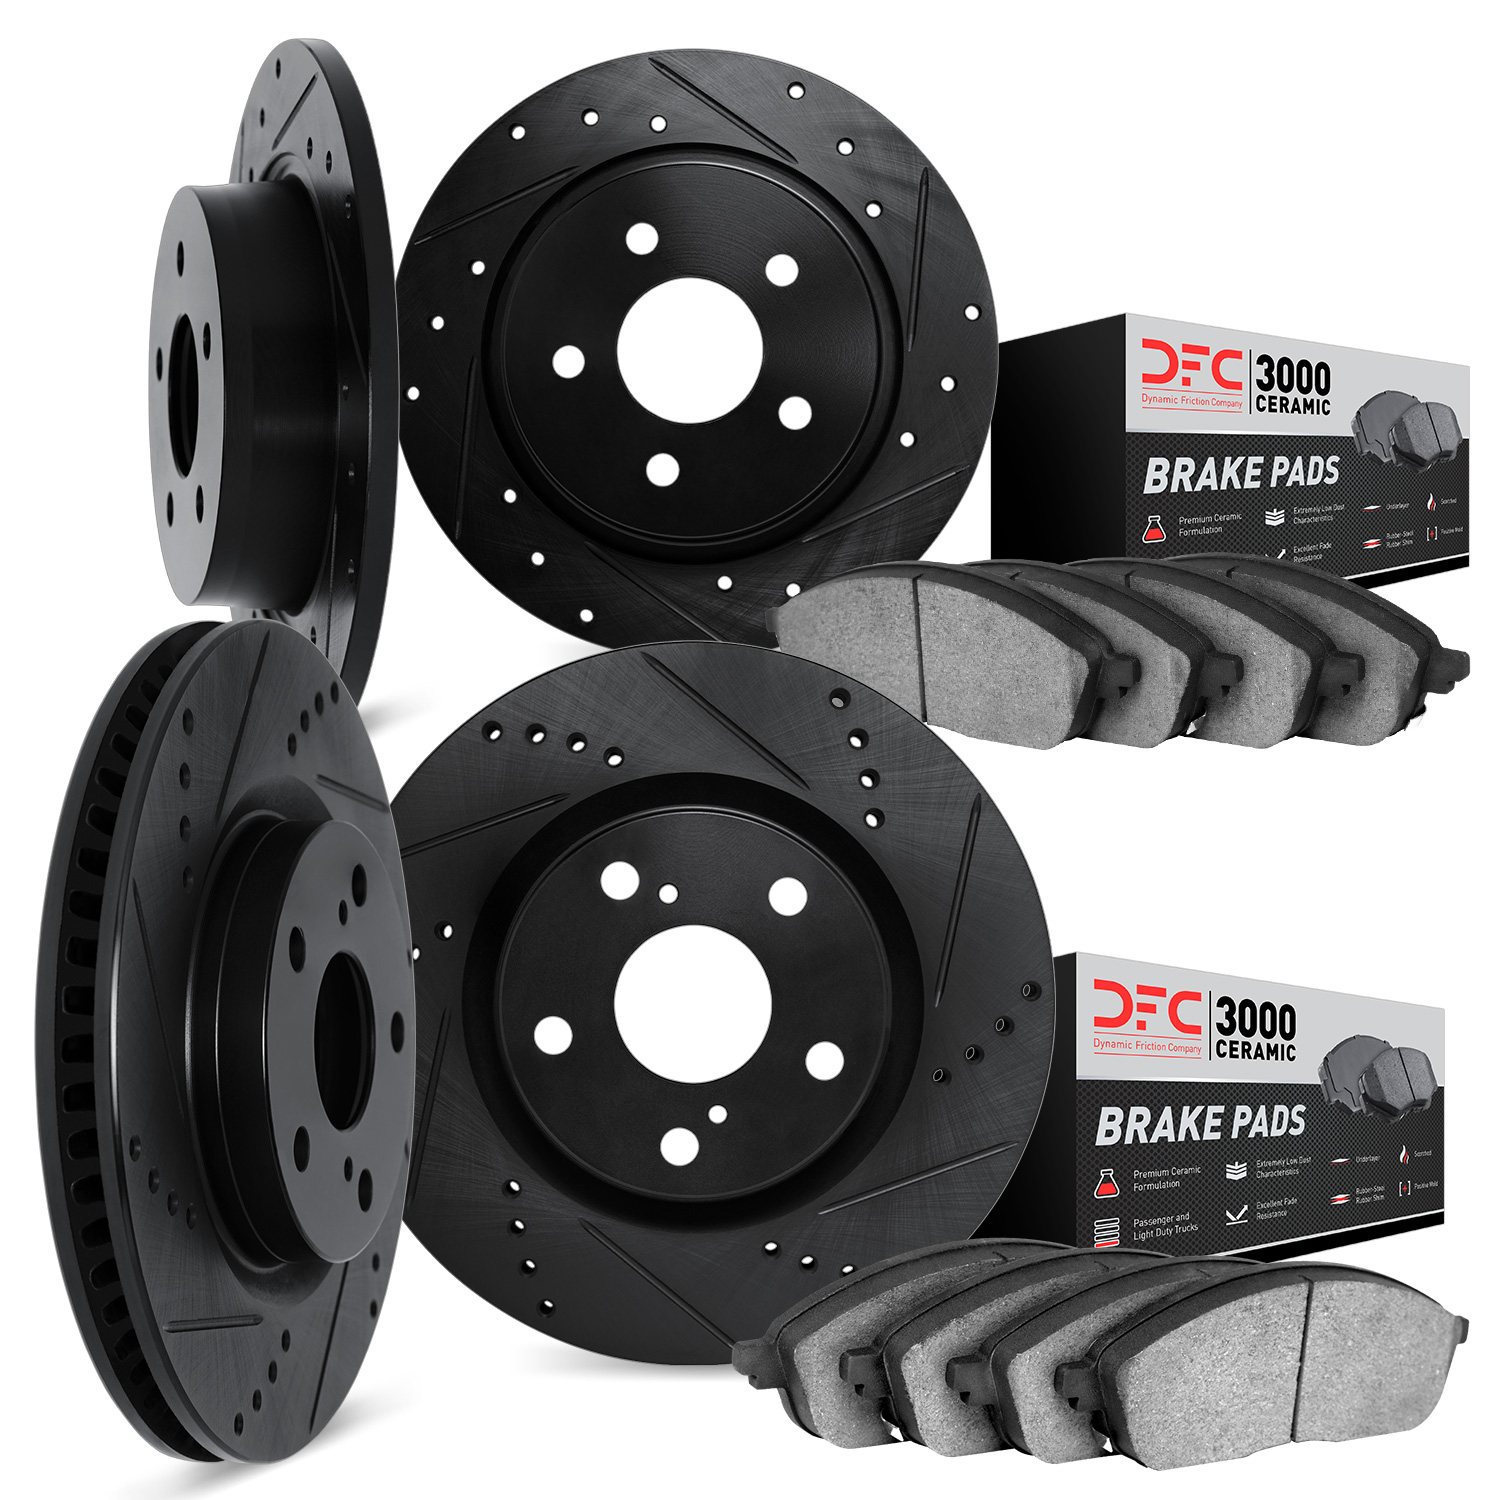 8304-59056 Drilled/Slotted Brake Rotors with 3000-Series Ceramic Brake Pads Kit [Black], 2003-2008 Acura/Honda, Position: Front